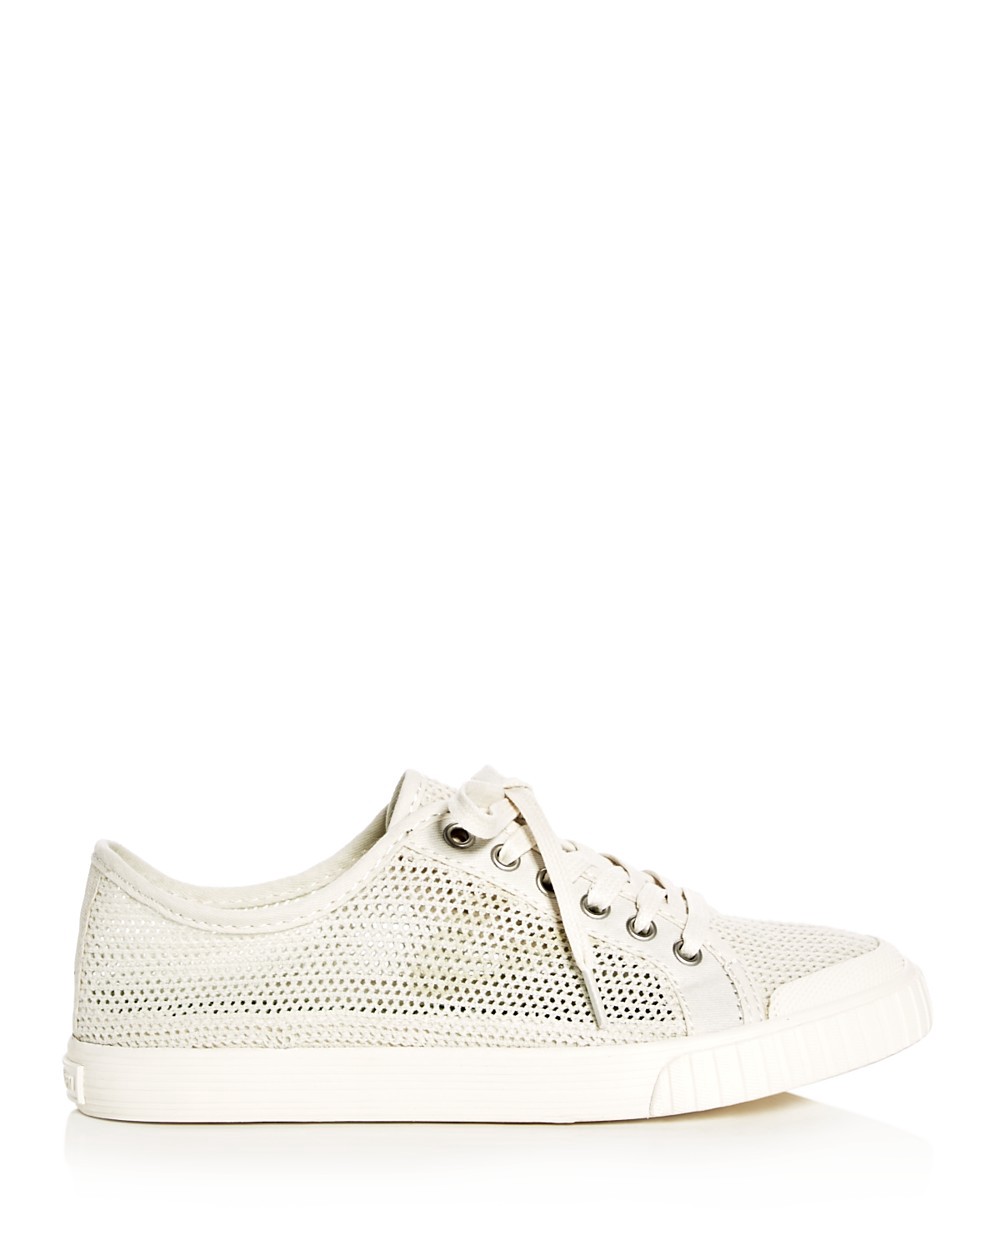 Tretorn Women's Tournament Net Lace Up Sneakers In Ivory | ModeSens